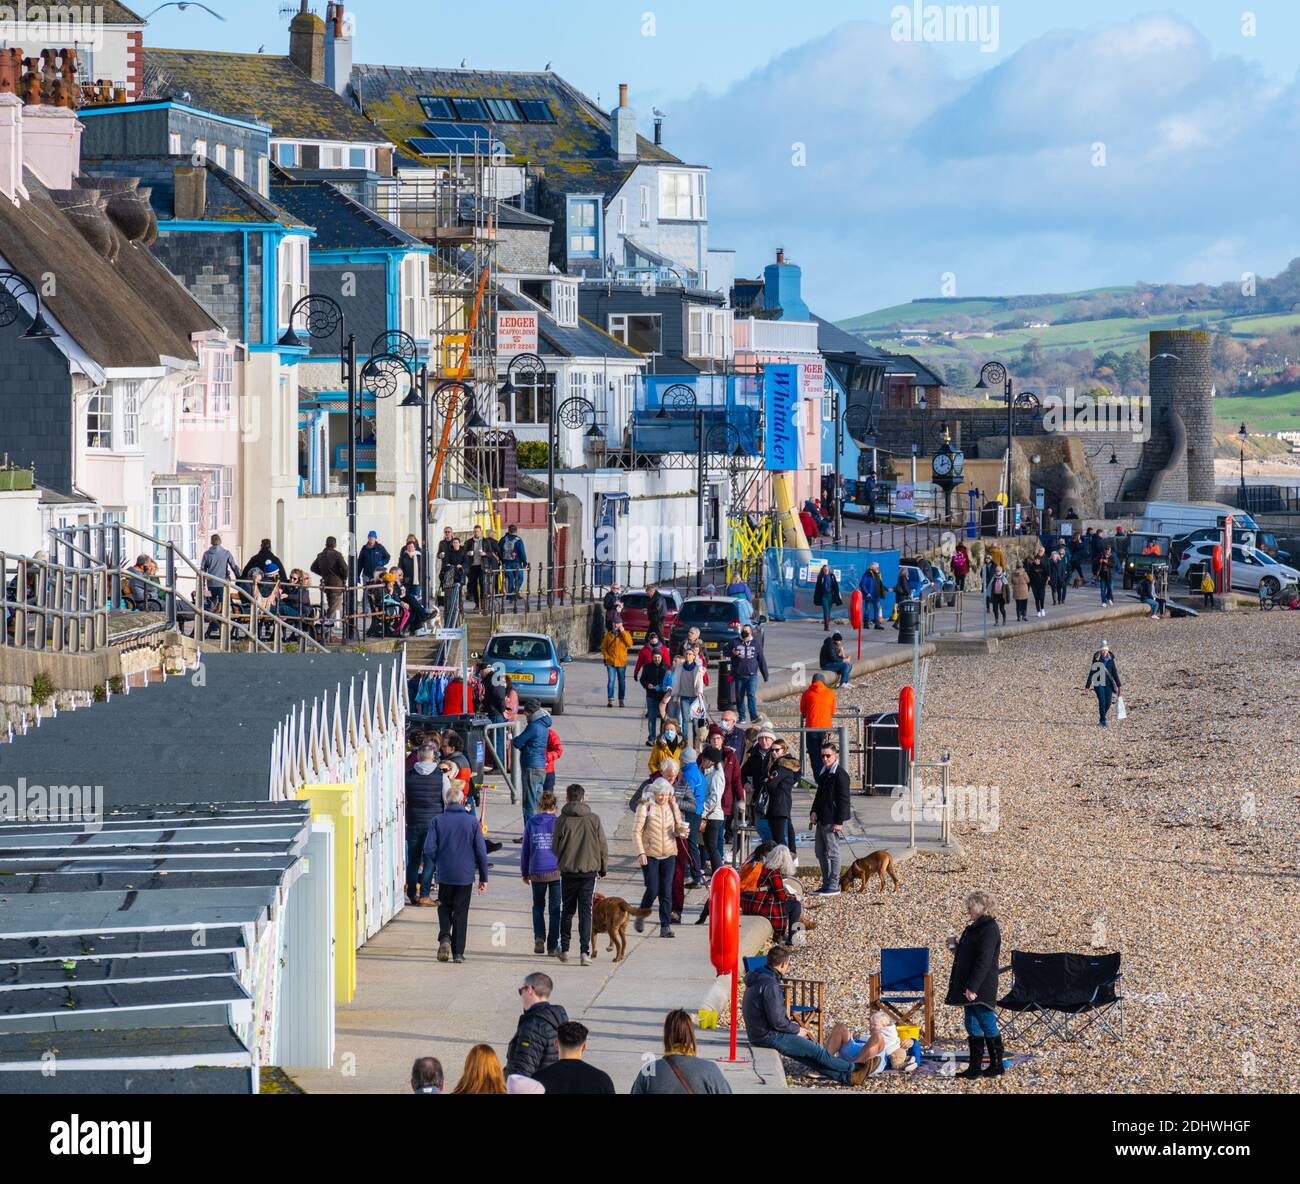 Lyme Regis, Dorset, UK. 12th  December 2020. UK Weather: Bright sunny spells at the coastal resort town of Lyme Regis. Locals and visitors enjoy a bright and chilly day by the sea ahead of rain showers forecast later in the day Credit: Celia McMahon/Alamy Live News. Stock Photo